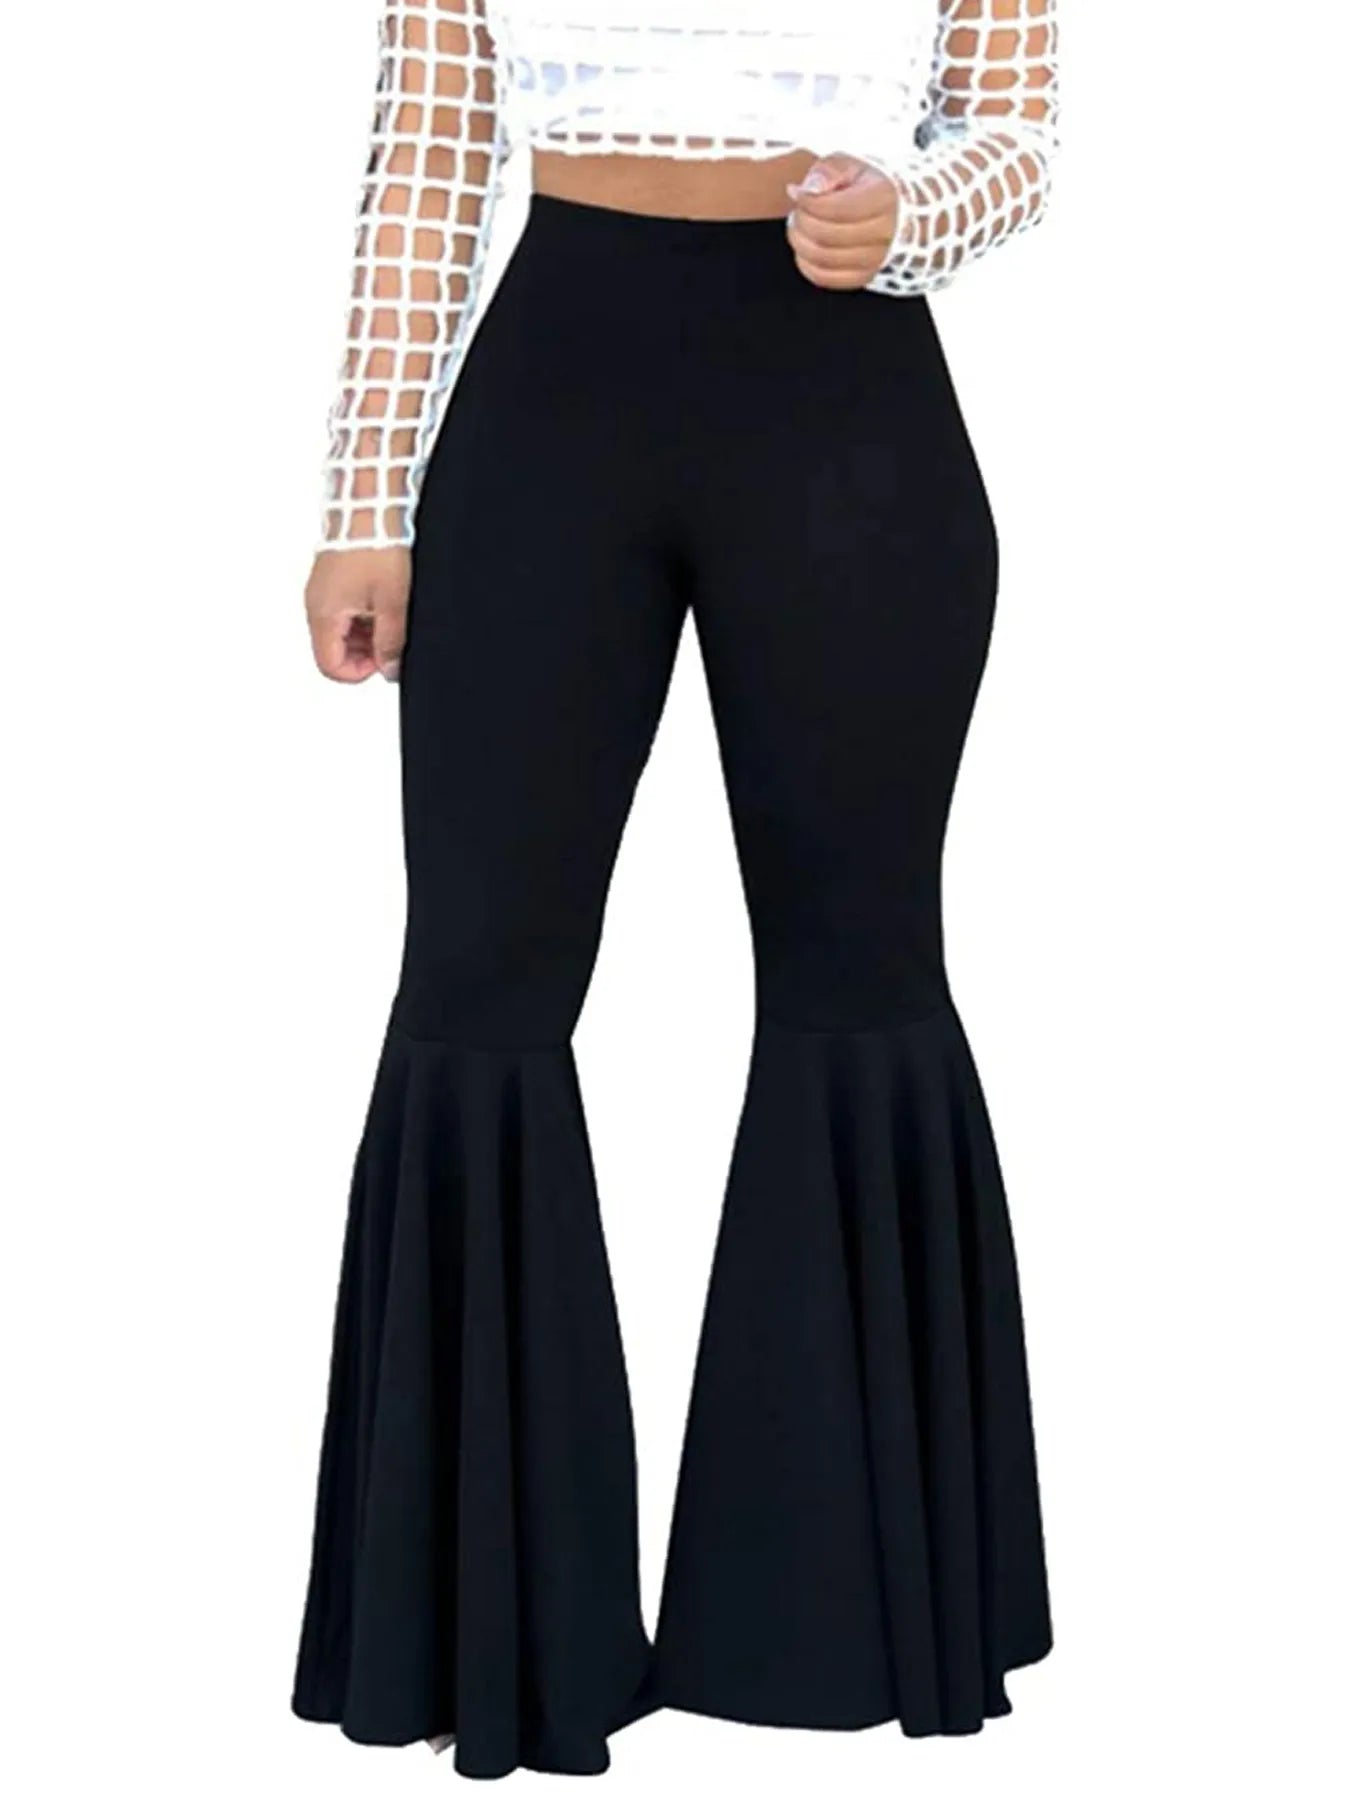 Plus-Size Bell-Bottomed Trousers